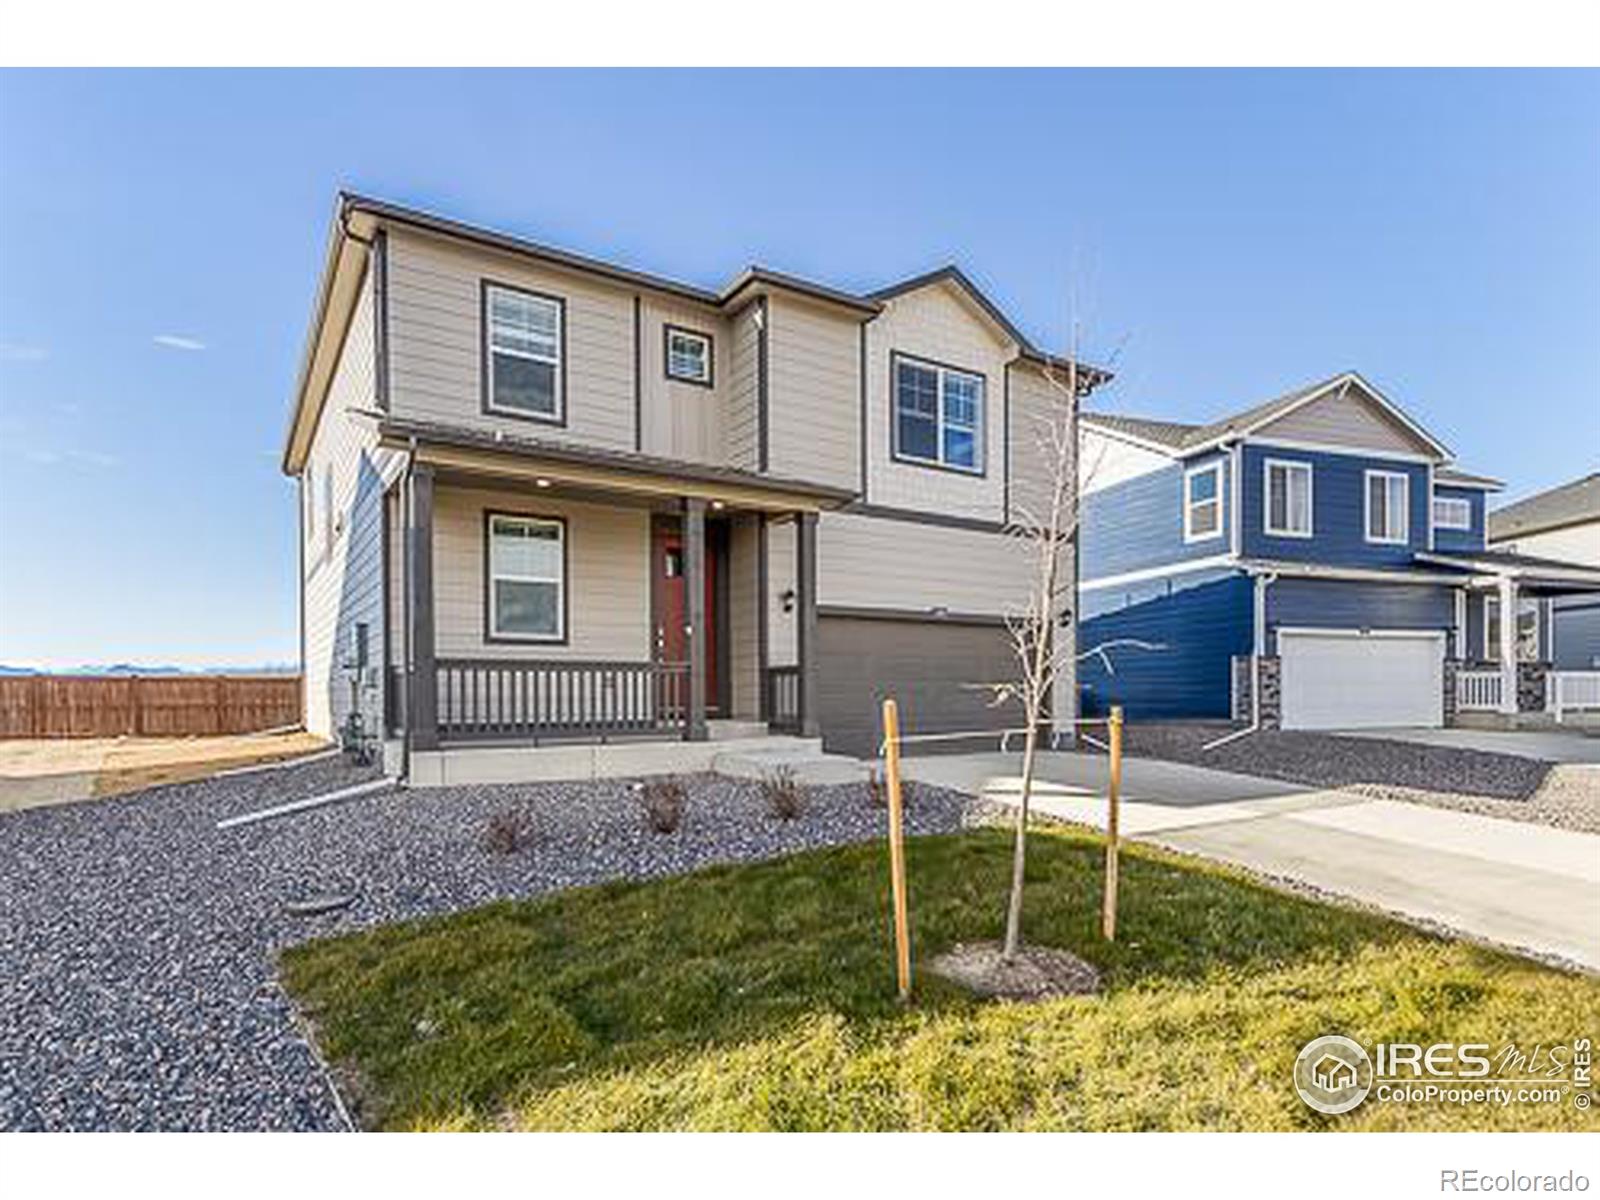 6407  2nd street, greeley sold home. Closed on 2024-05-29 for $510,000.